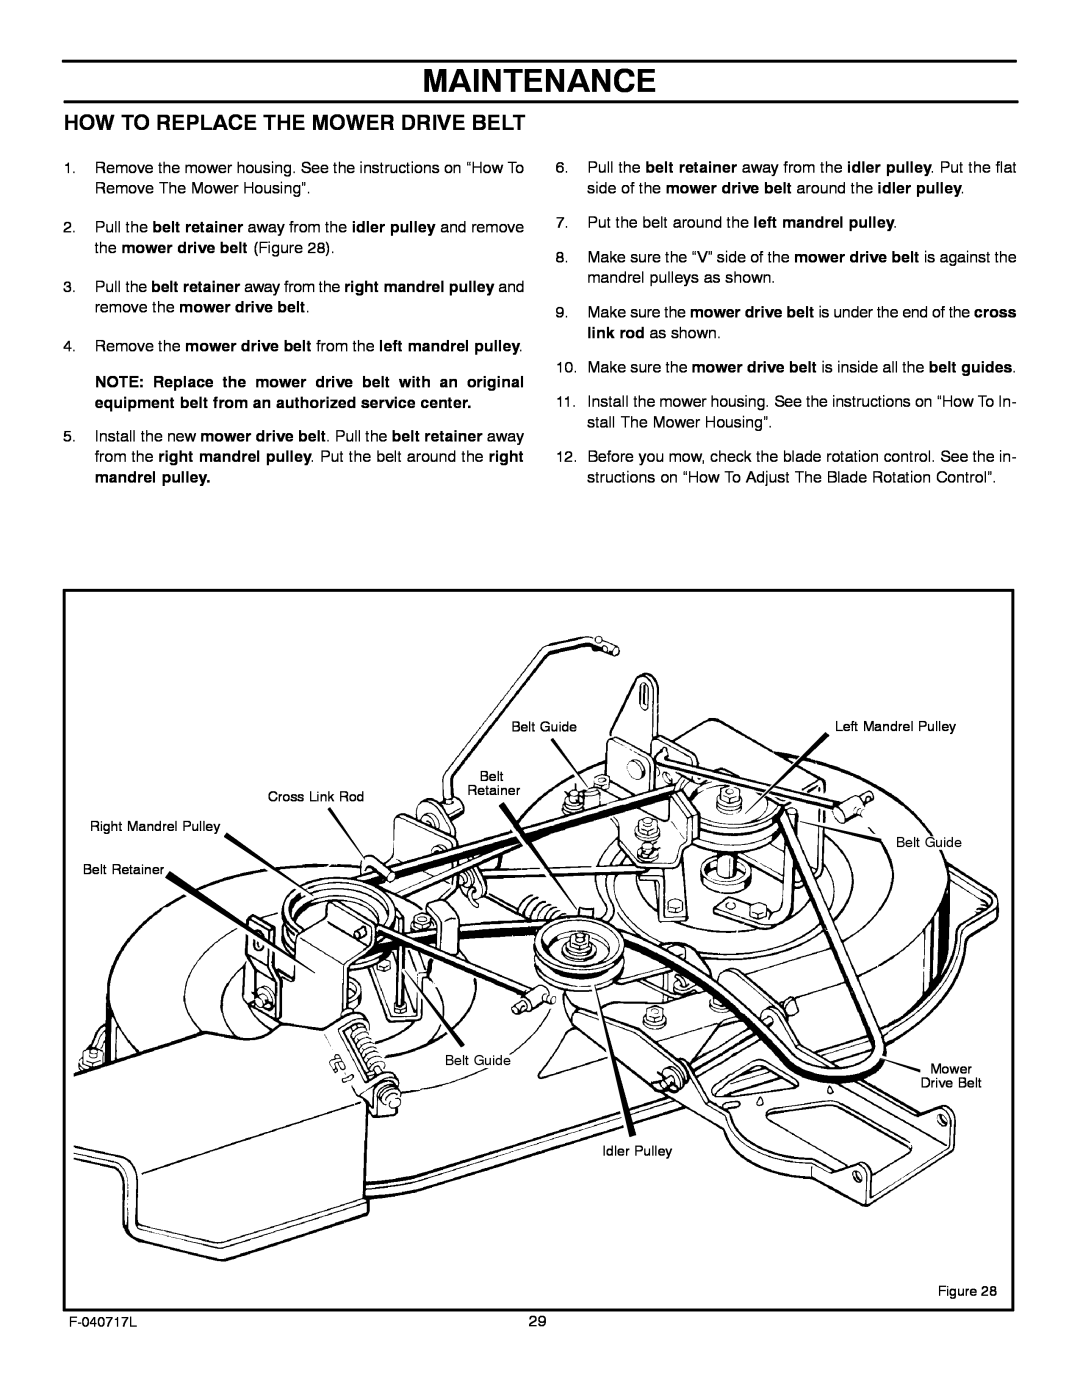 Murray 387002x92A manual Maintenance, How To Replace The Mower Drive Belt 